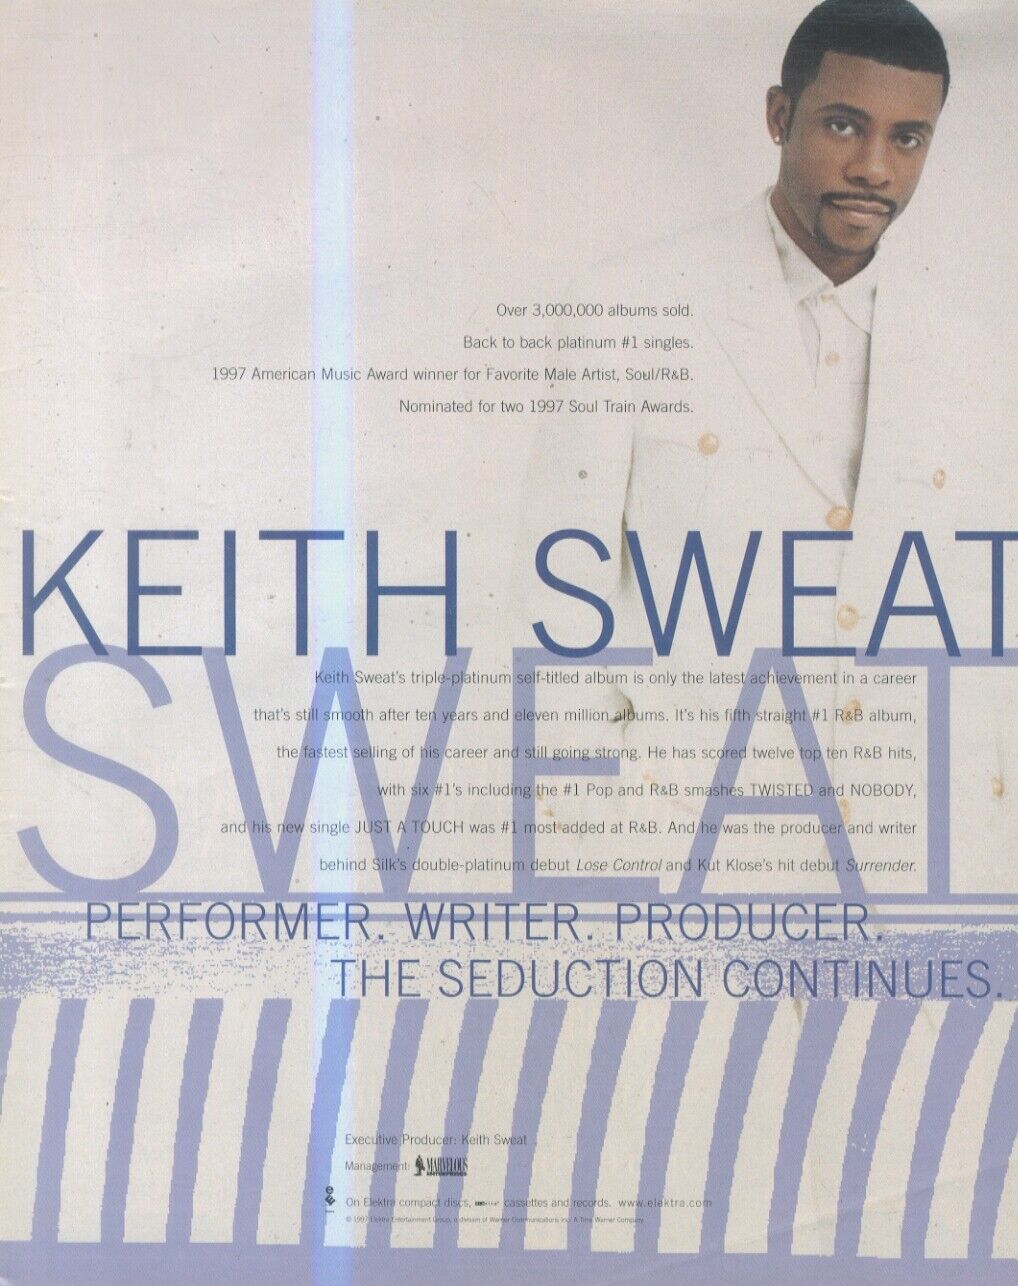 HFBK70 PICTURE/ADVERT 13x11 KEITH SWEAT : KEITH SWEAT